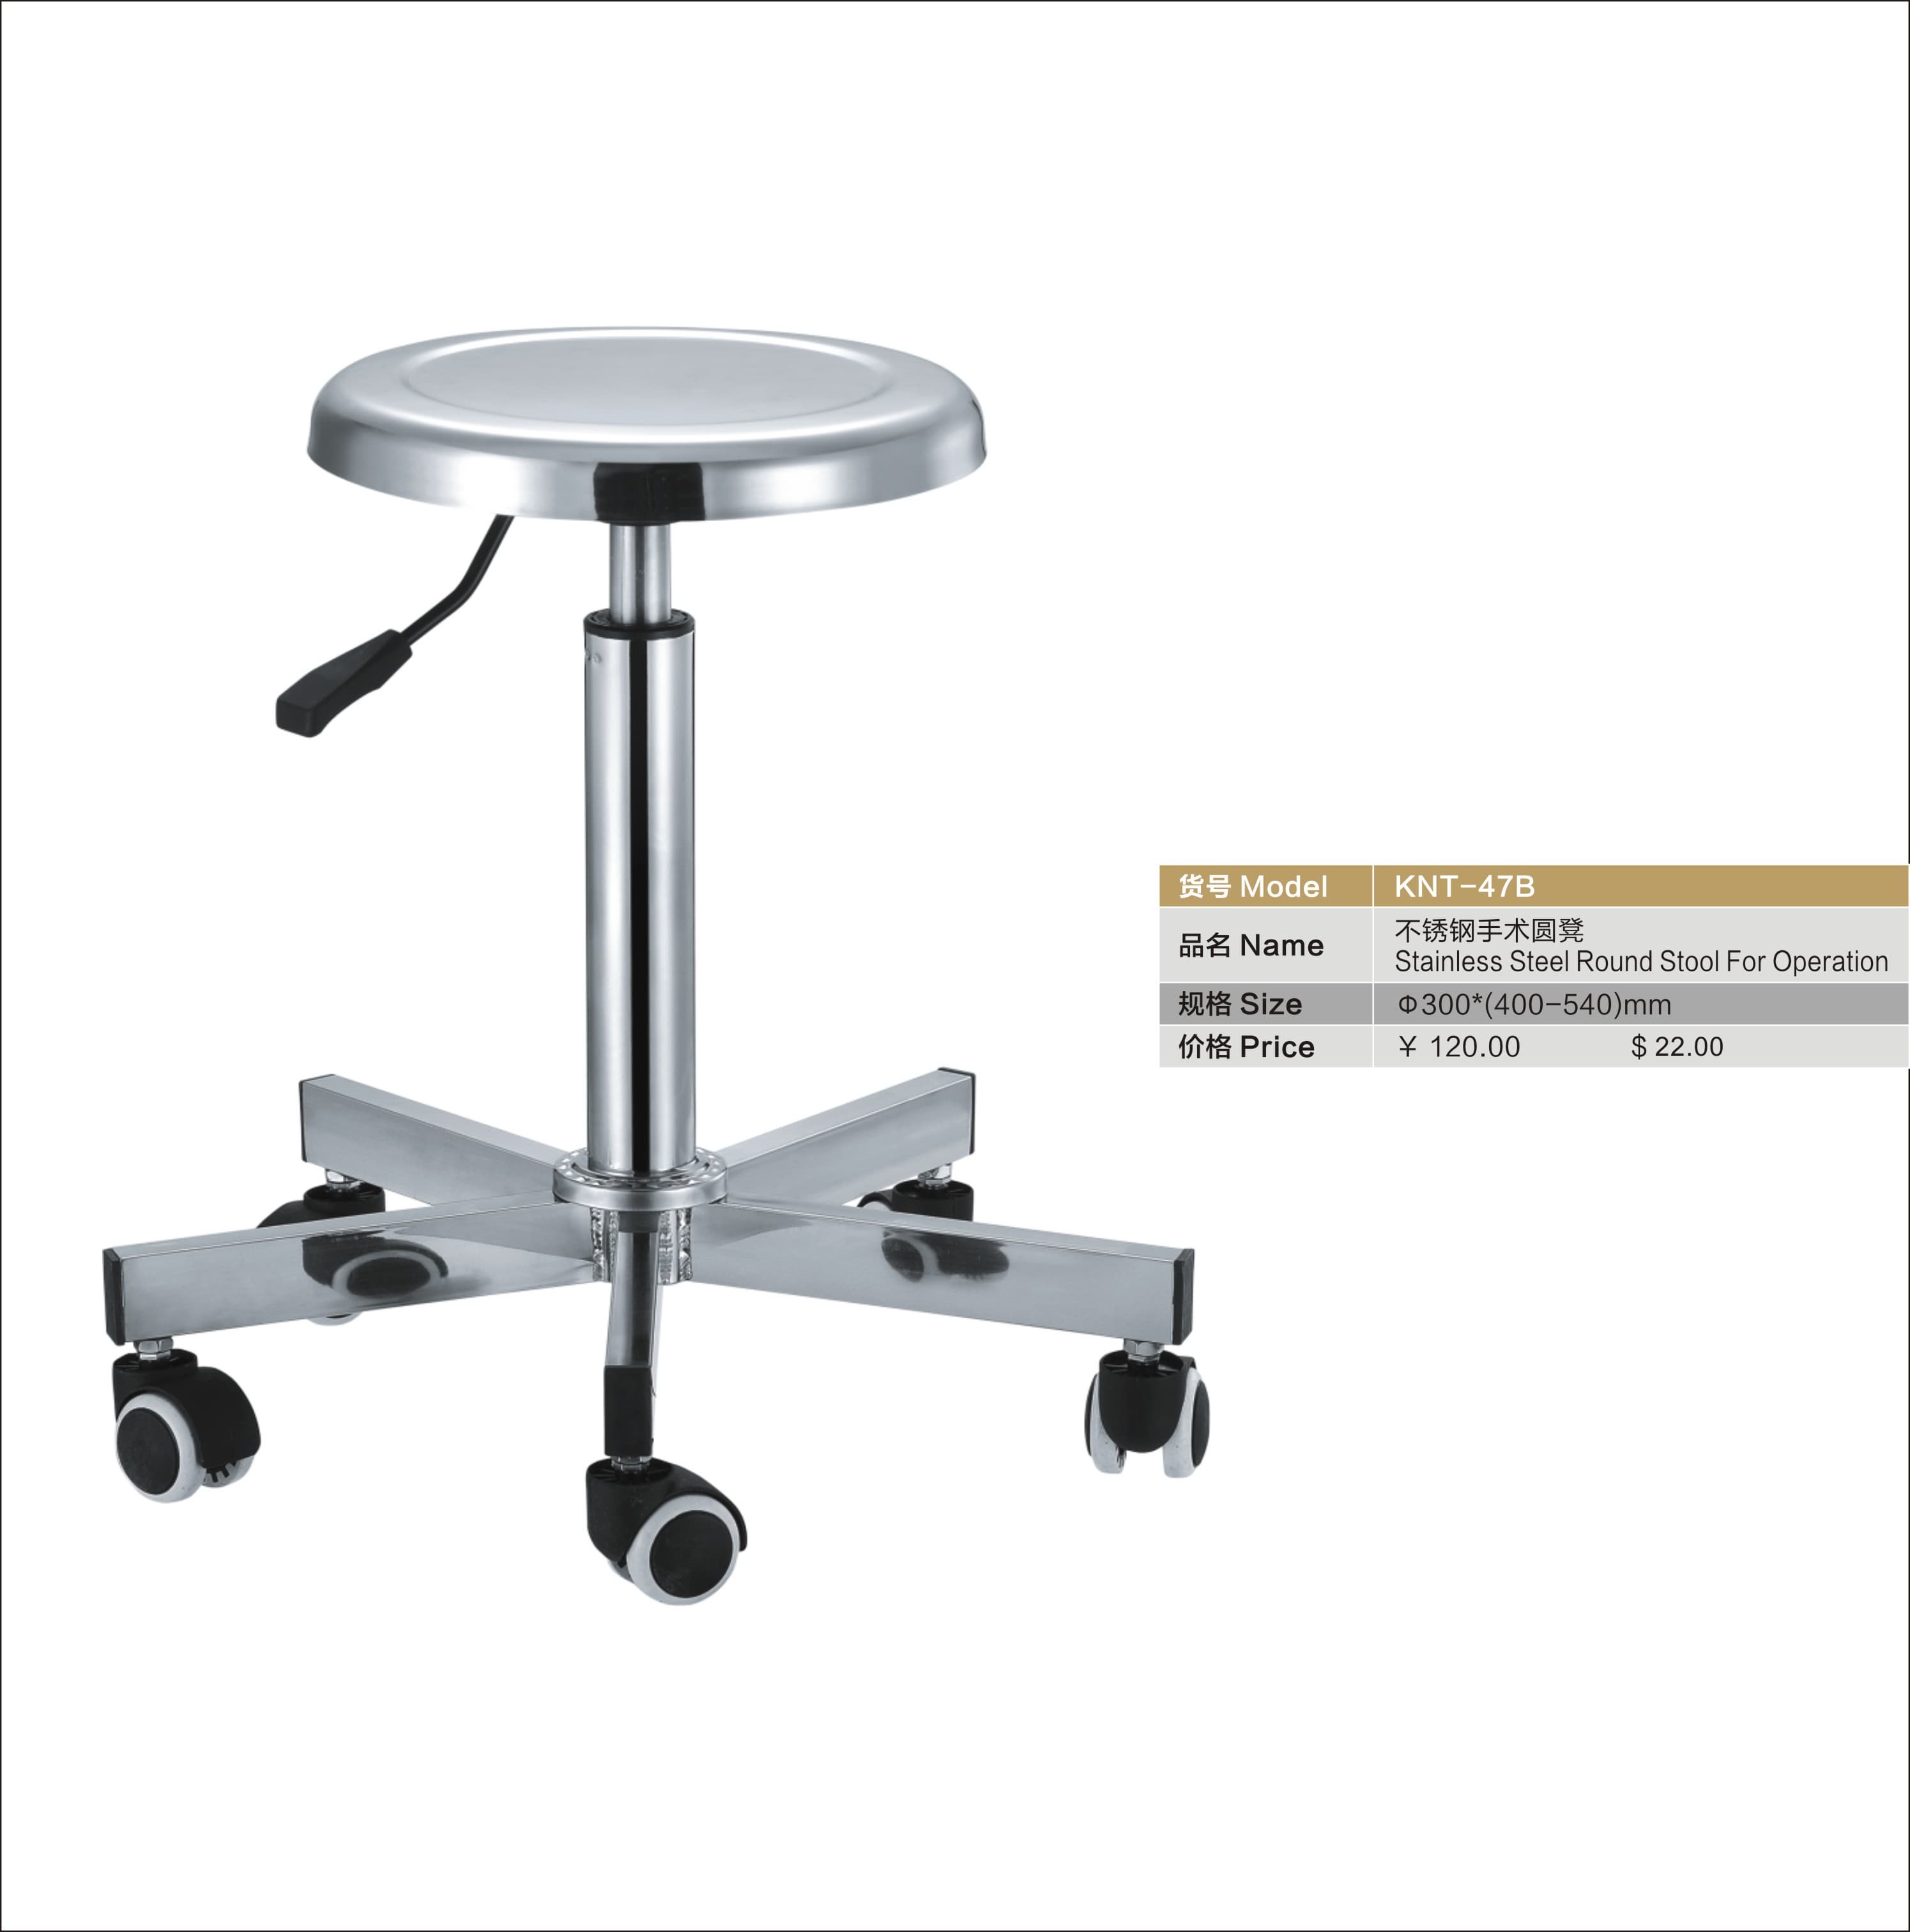 steel round stool for operation